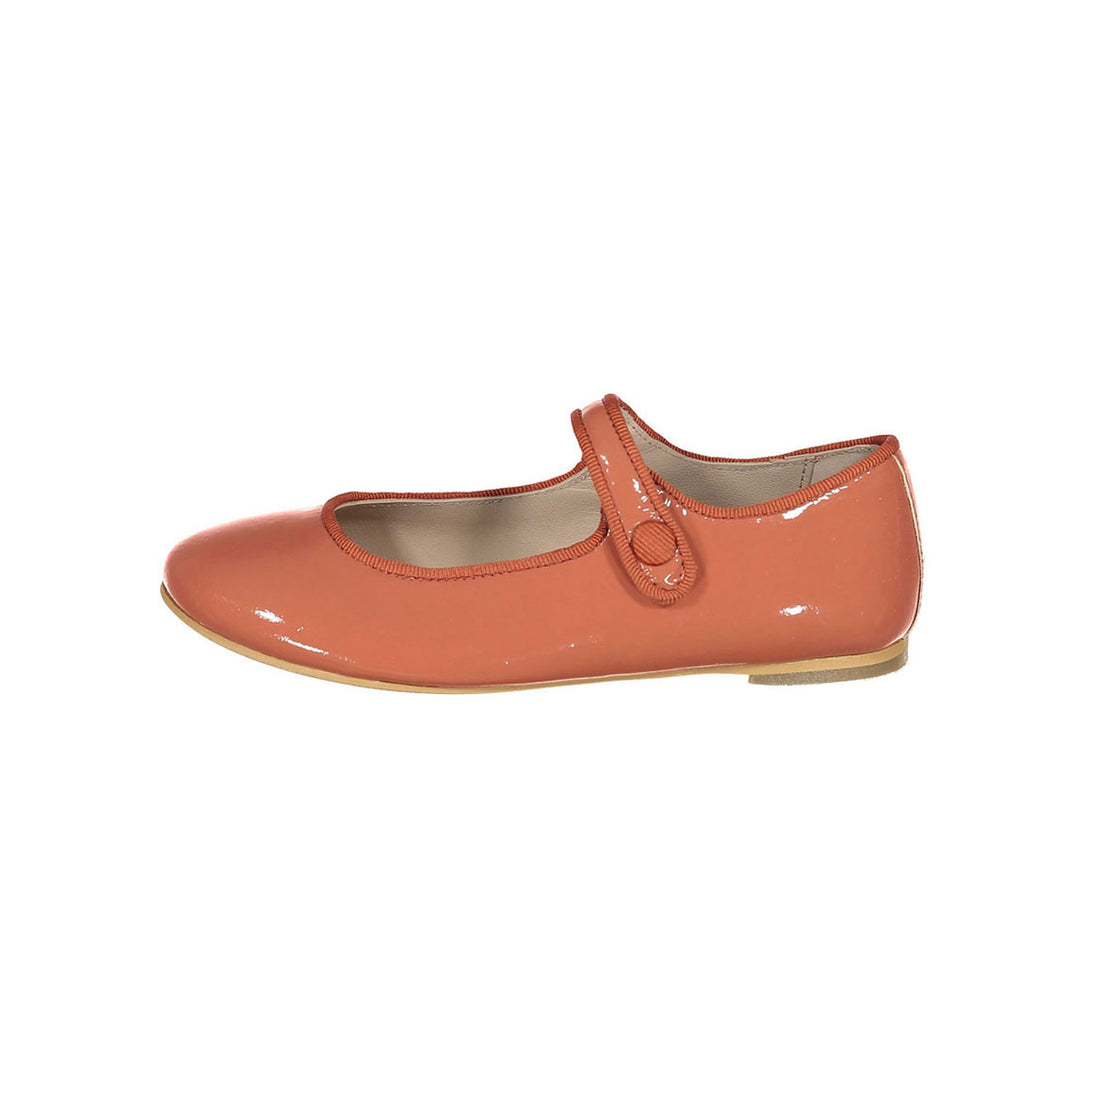 L By Ladida Coral Mary Janes